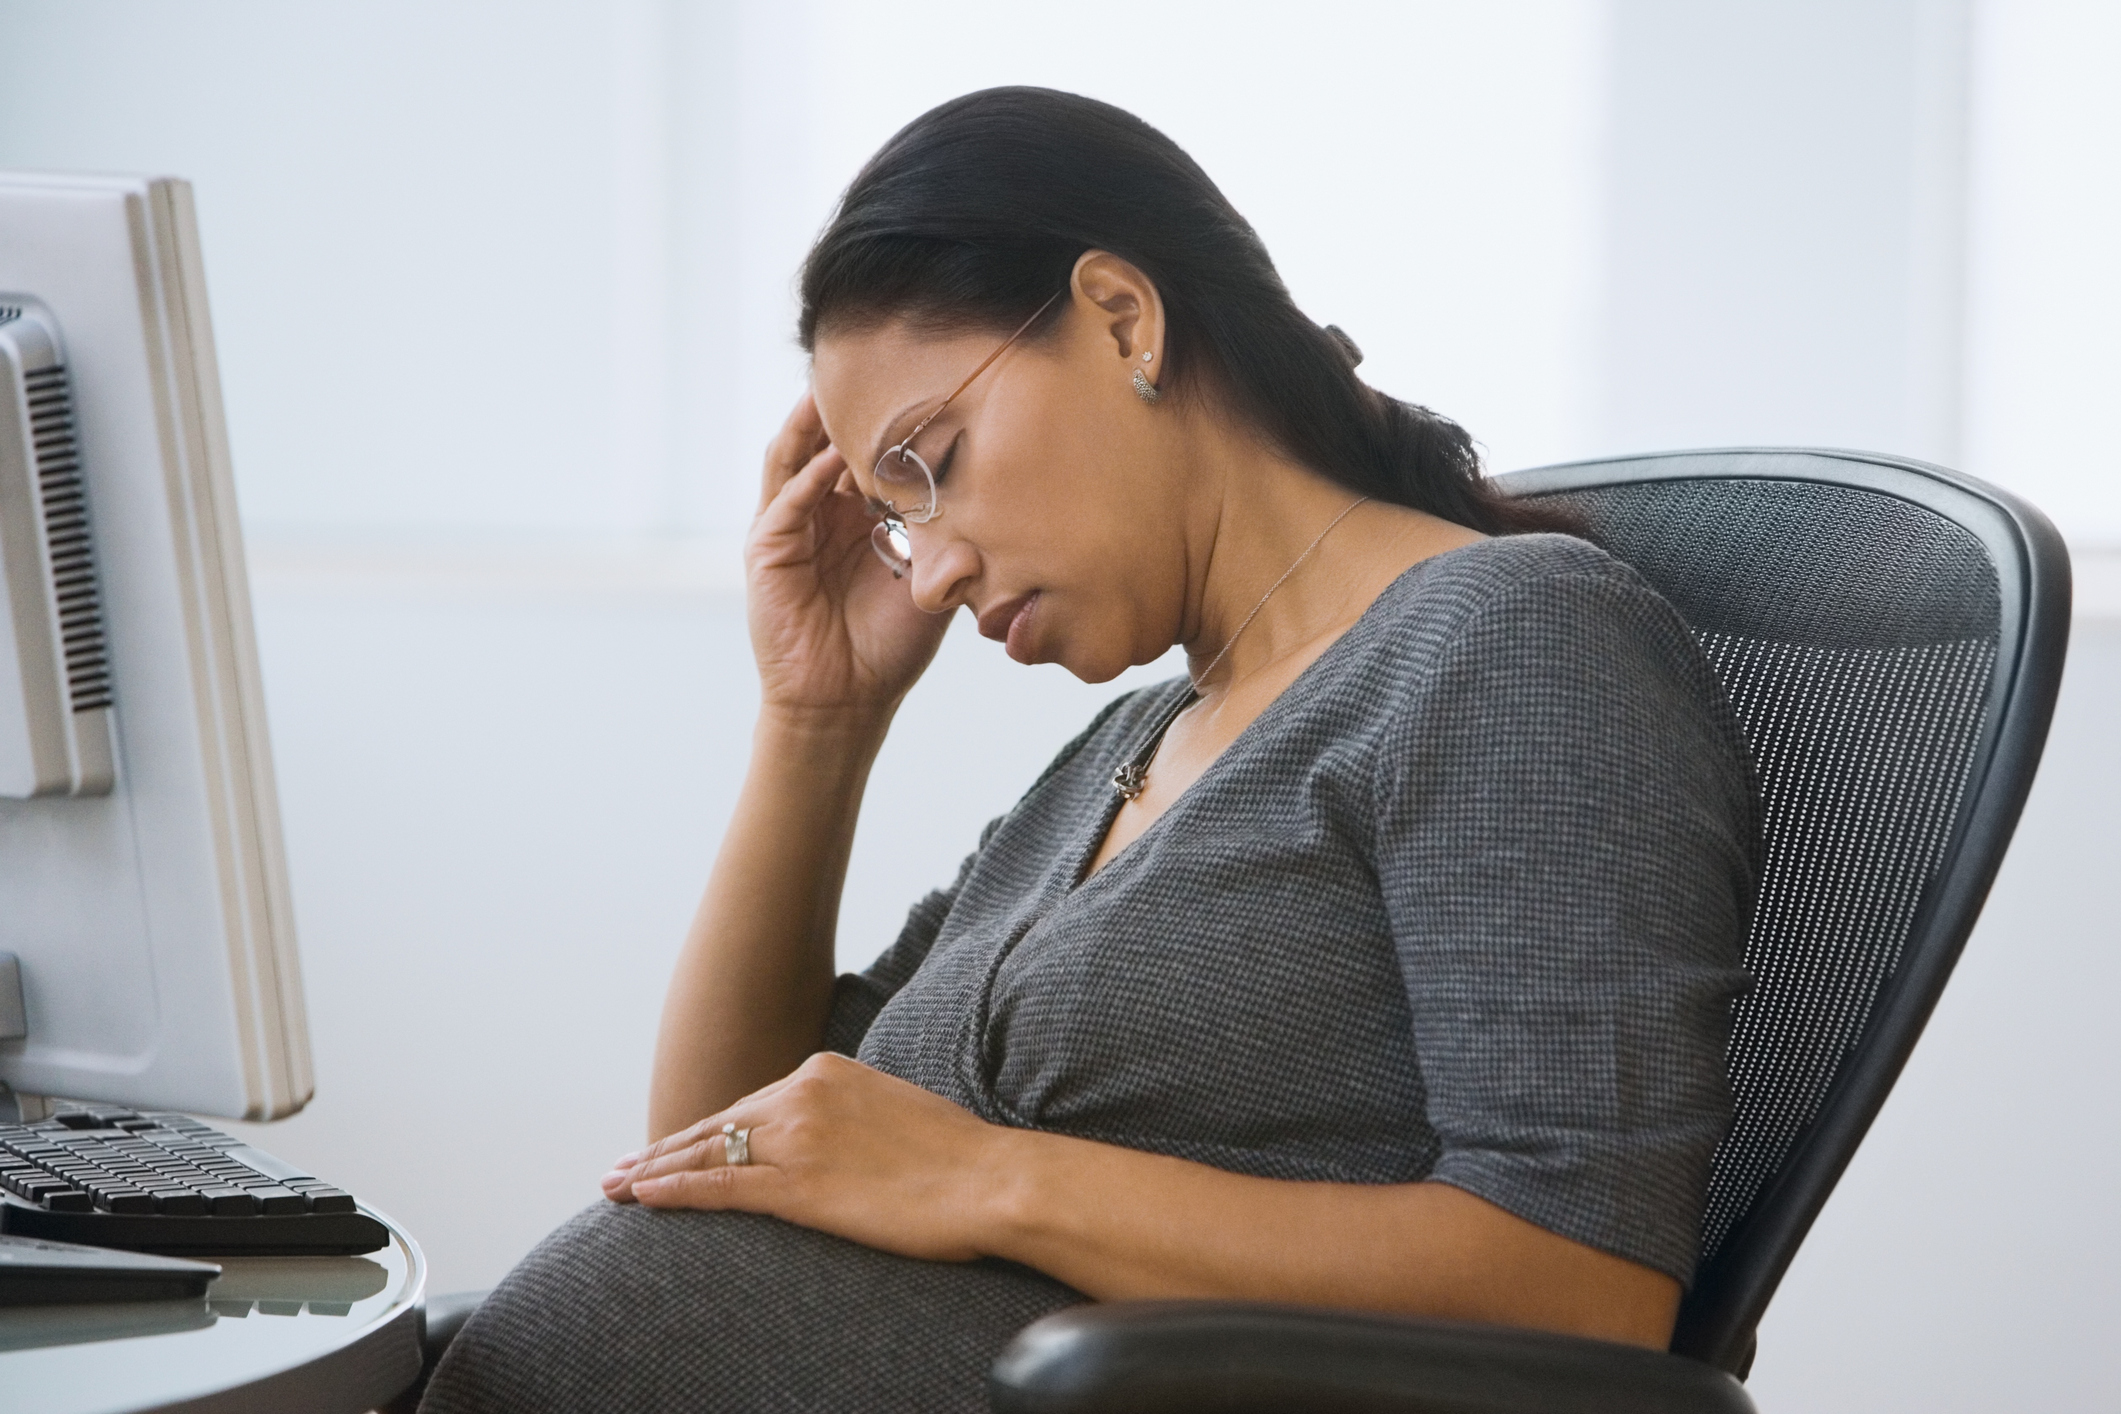 WHY WOMEN SHOULD AVOID BEING STRESSED DURING PREGNANCY